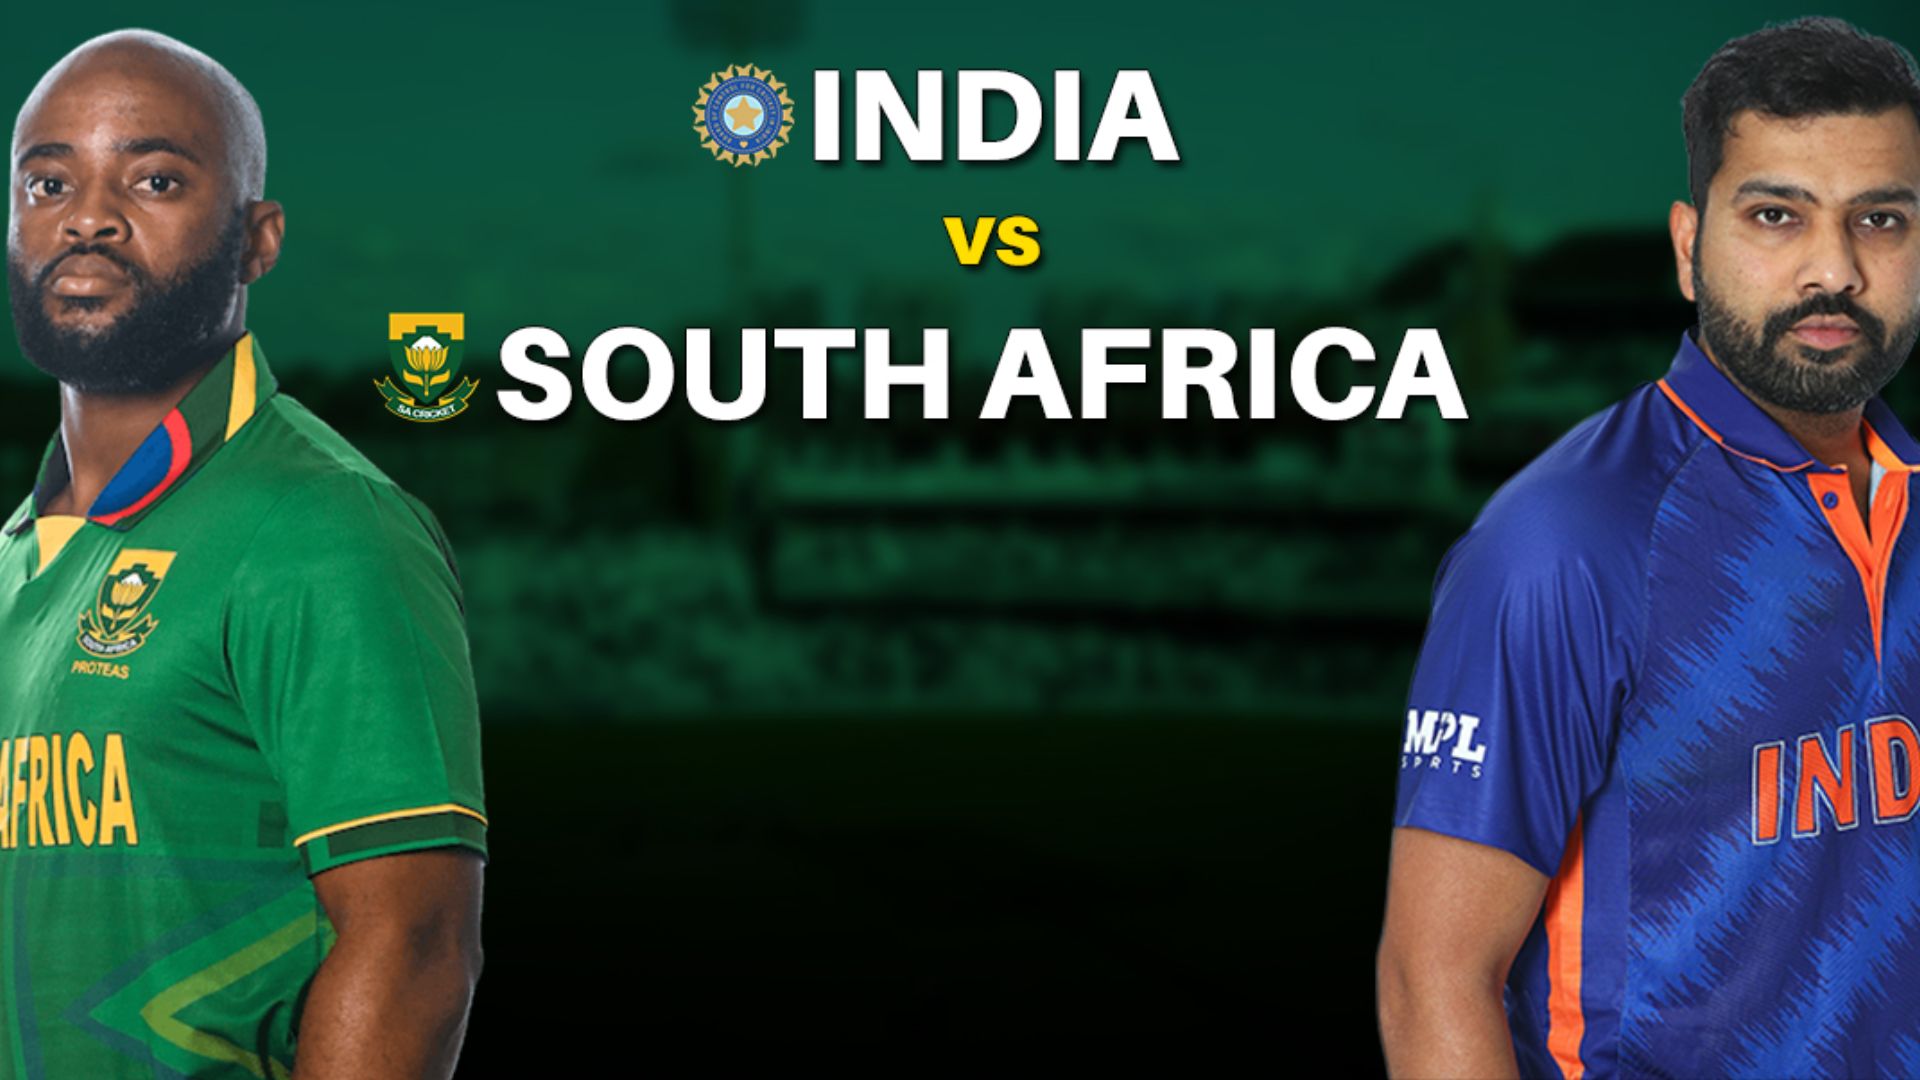 IND vs SA 2022 Schedule: India vs South Africa T20 and ODI Schedule, Squad, Venue and Live